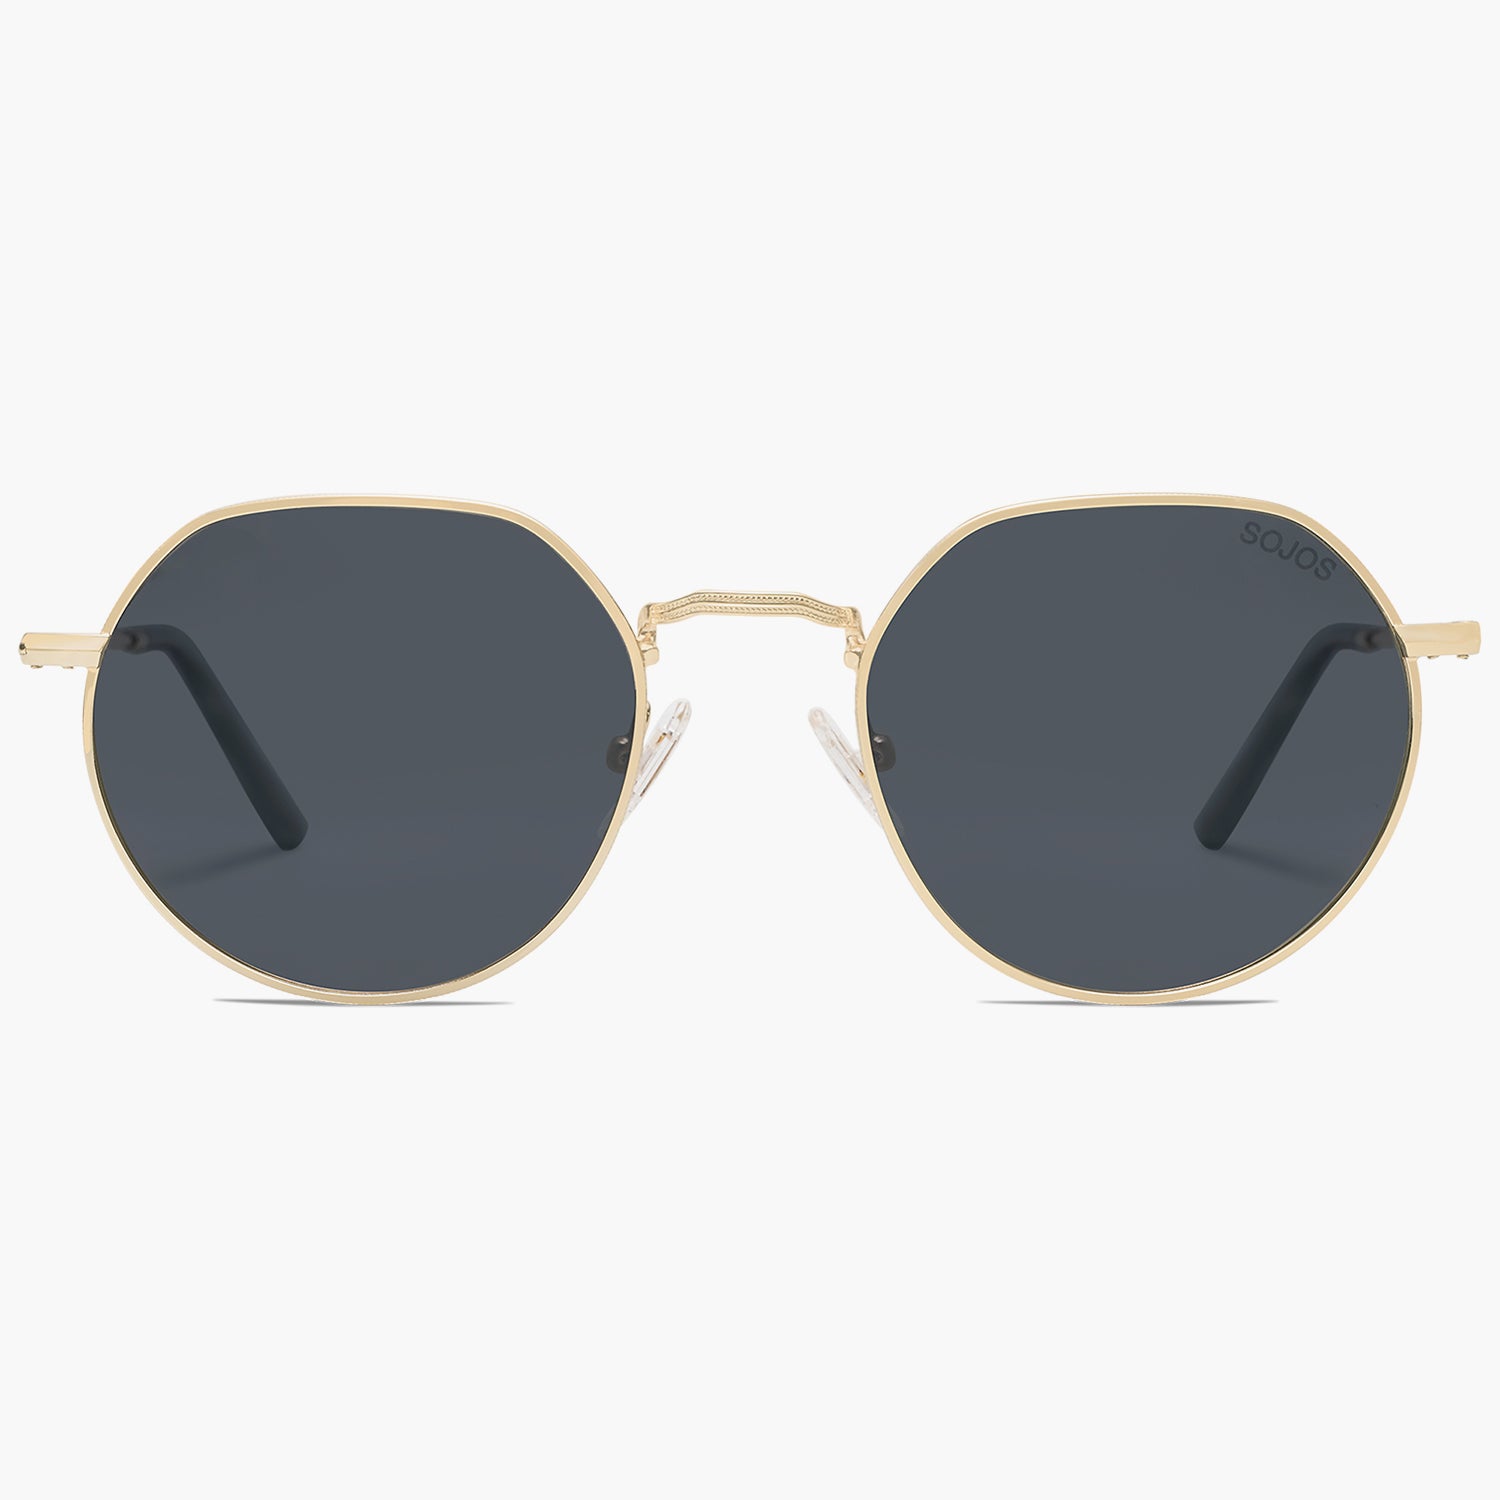 Buy Mirrored Square Sunglasses for Women | Throwback | SOJOS